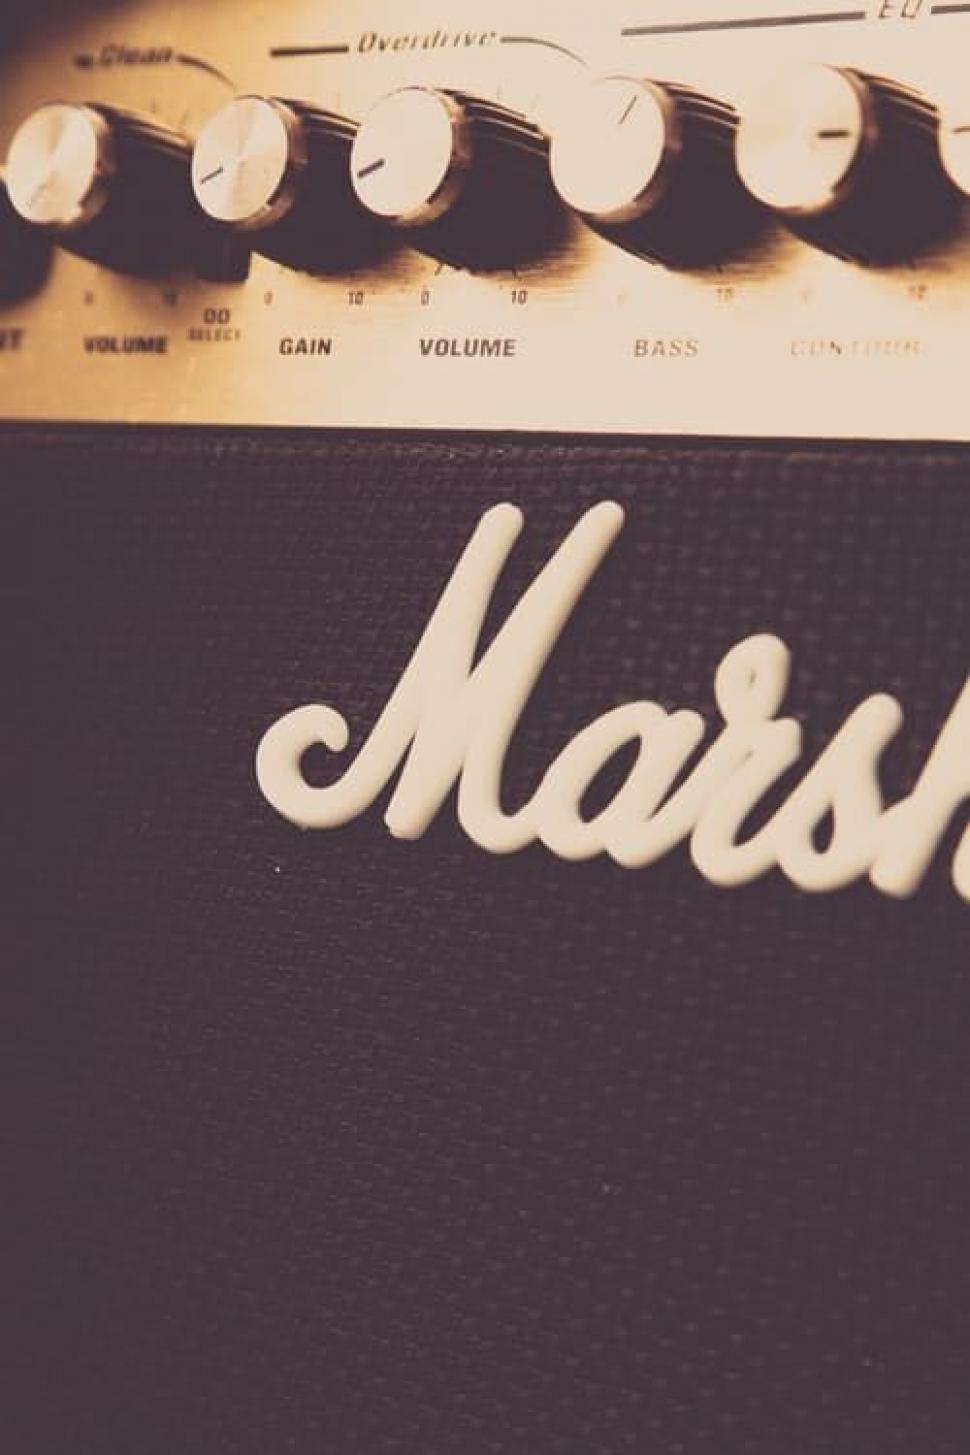 Free Image of Close-up of a Marshall guitar amplifier 